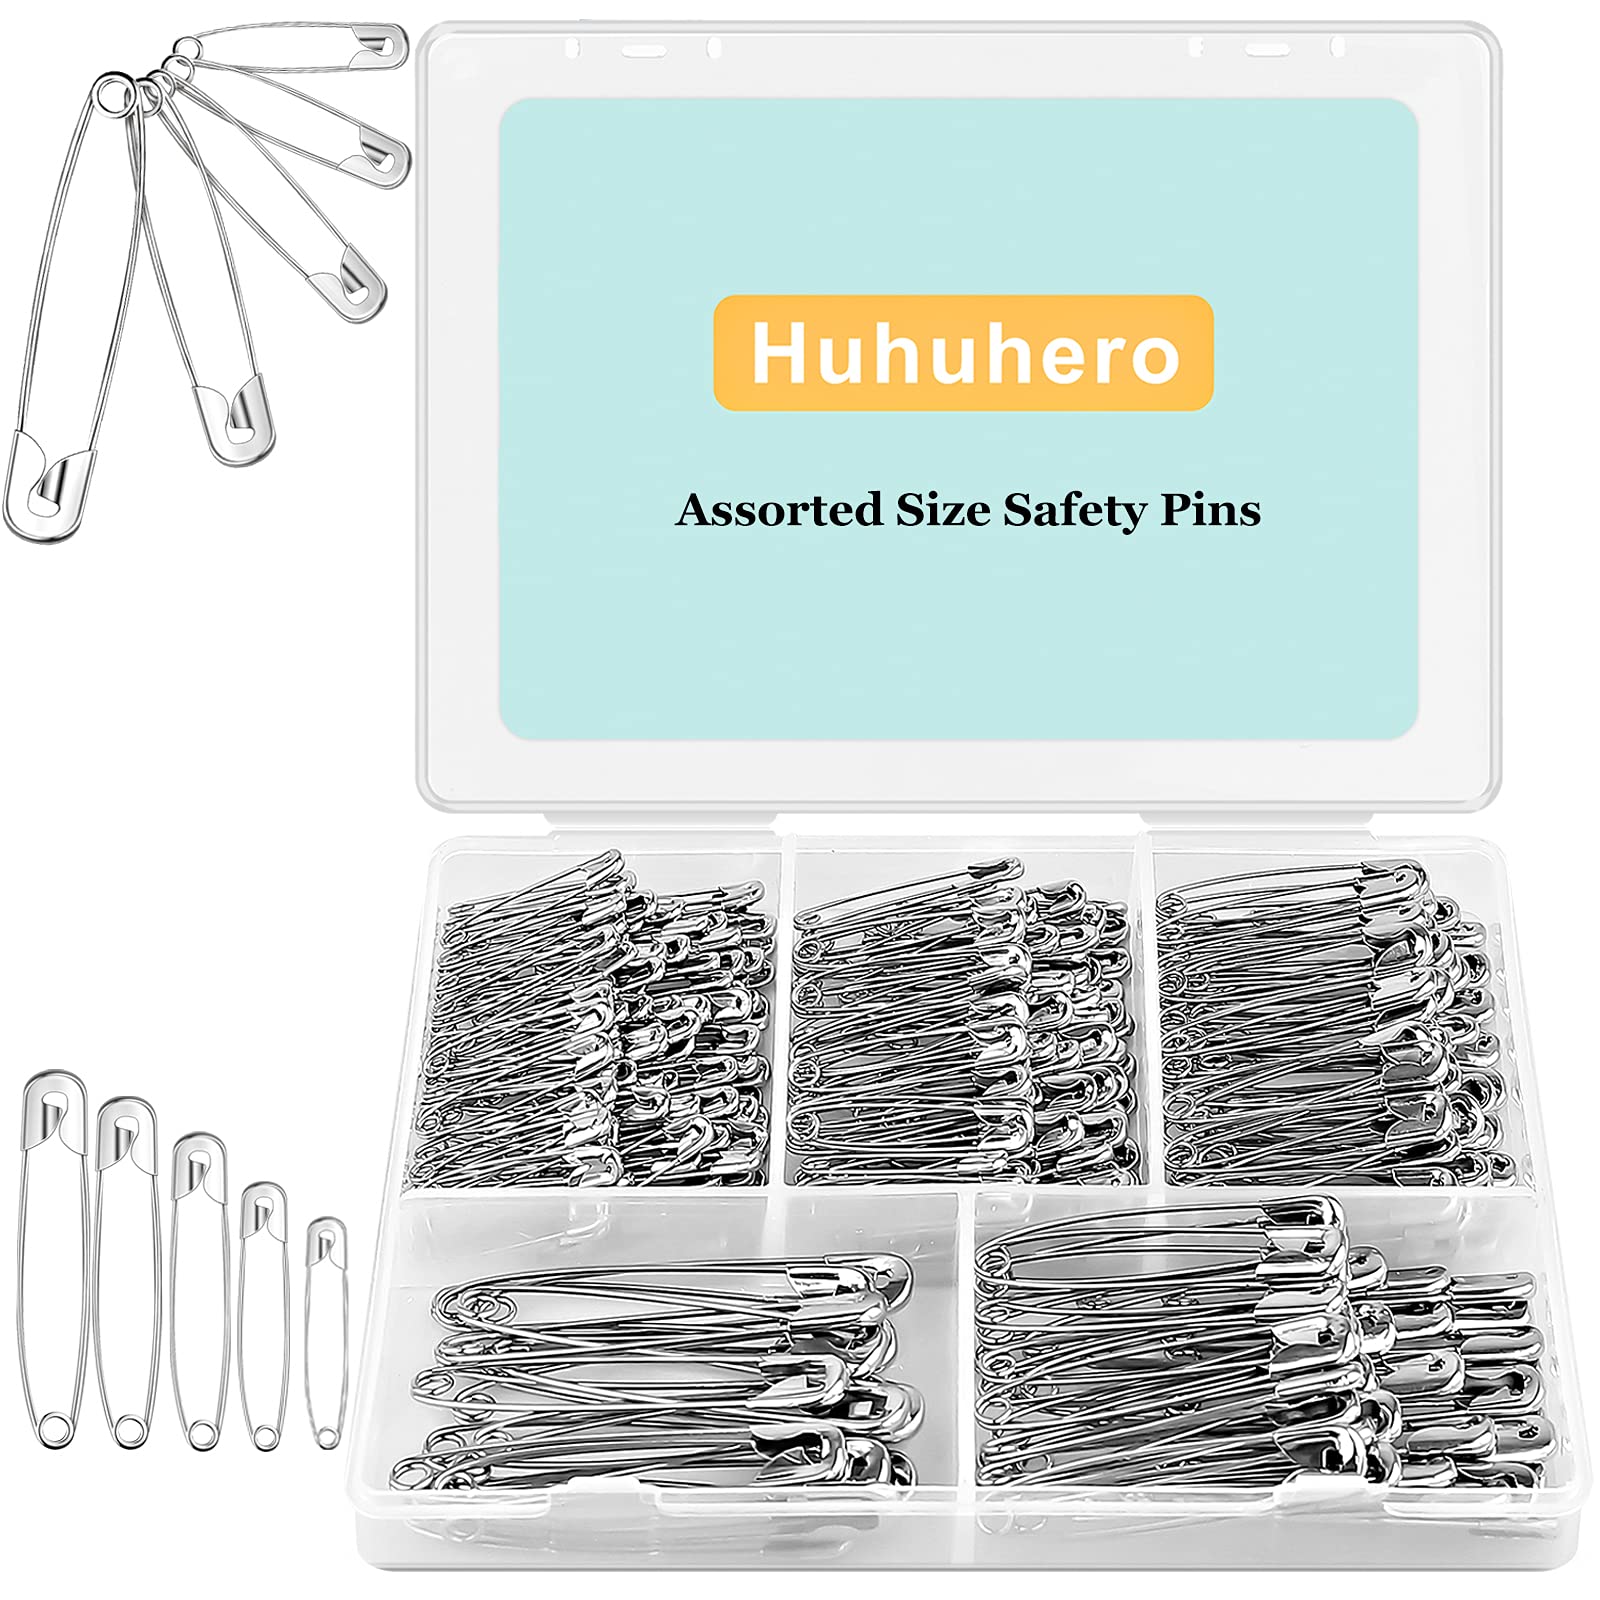 Safety Pins Assorted, 340-Pack 5 Different Sizes Large Safety Pins Heavy Duty Safety Pin, Safety Pins for Clothes Pins, Small Safety Pins for Sewing, Crafts $5.59